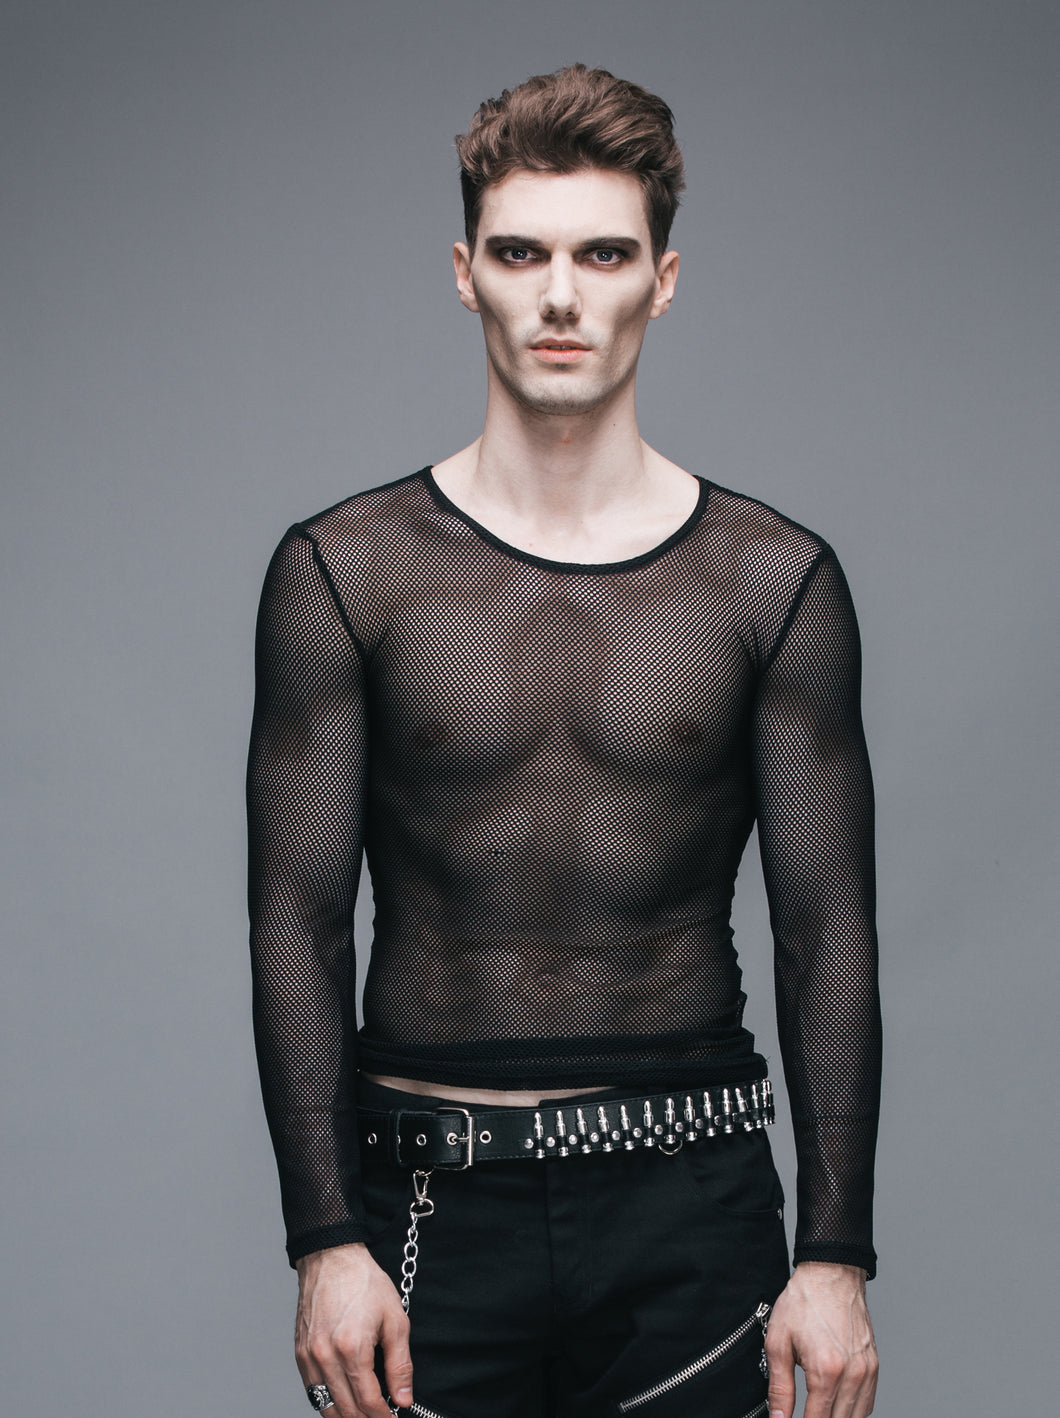 MTL004 fetish see through mesh t-shirts for women and men